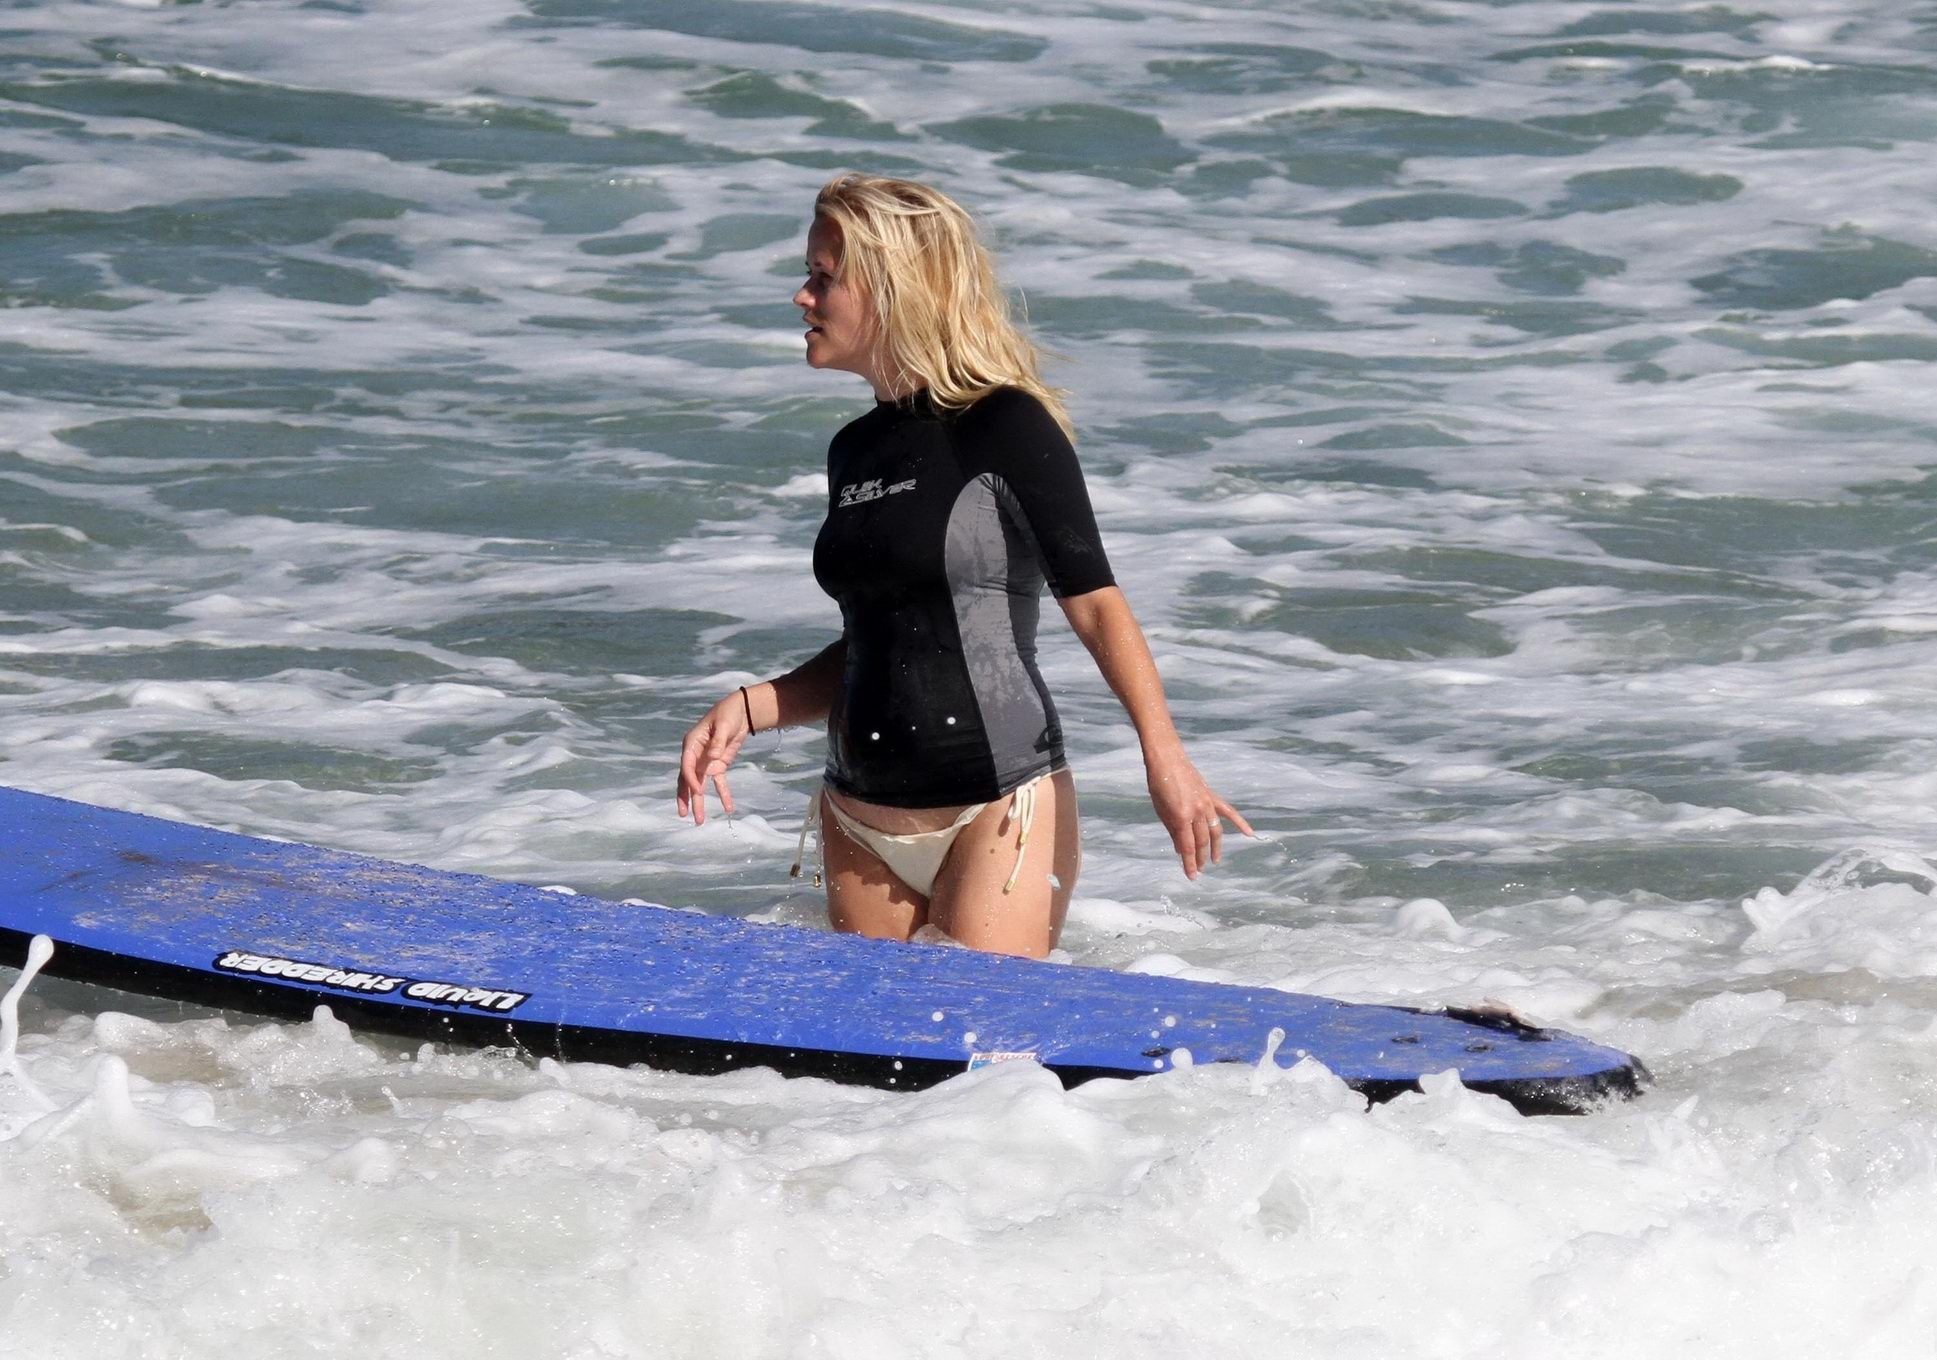 Reese Witherspoon shows off her ass while surfing in Hawaii #75291238